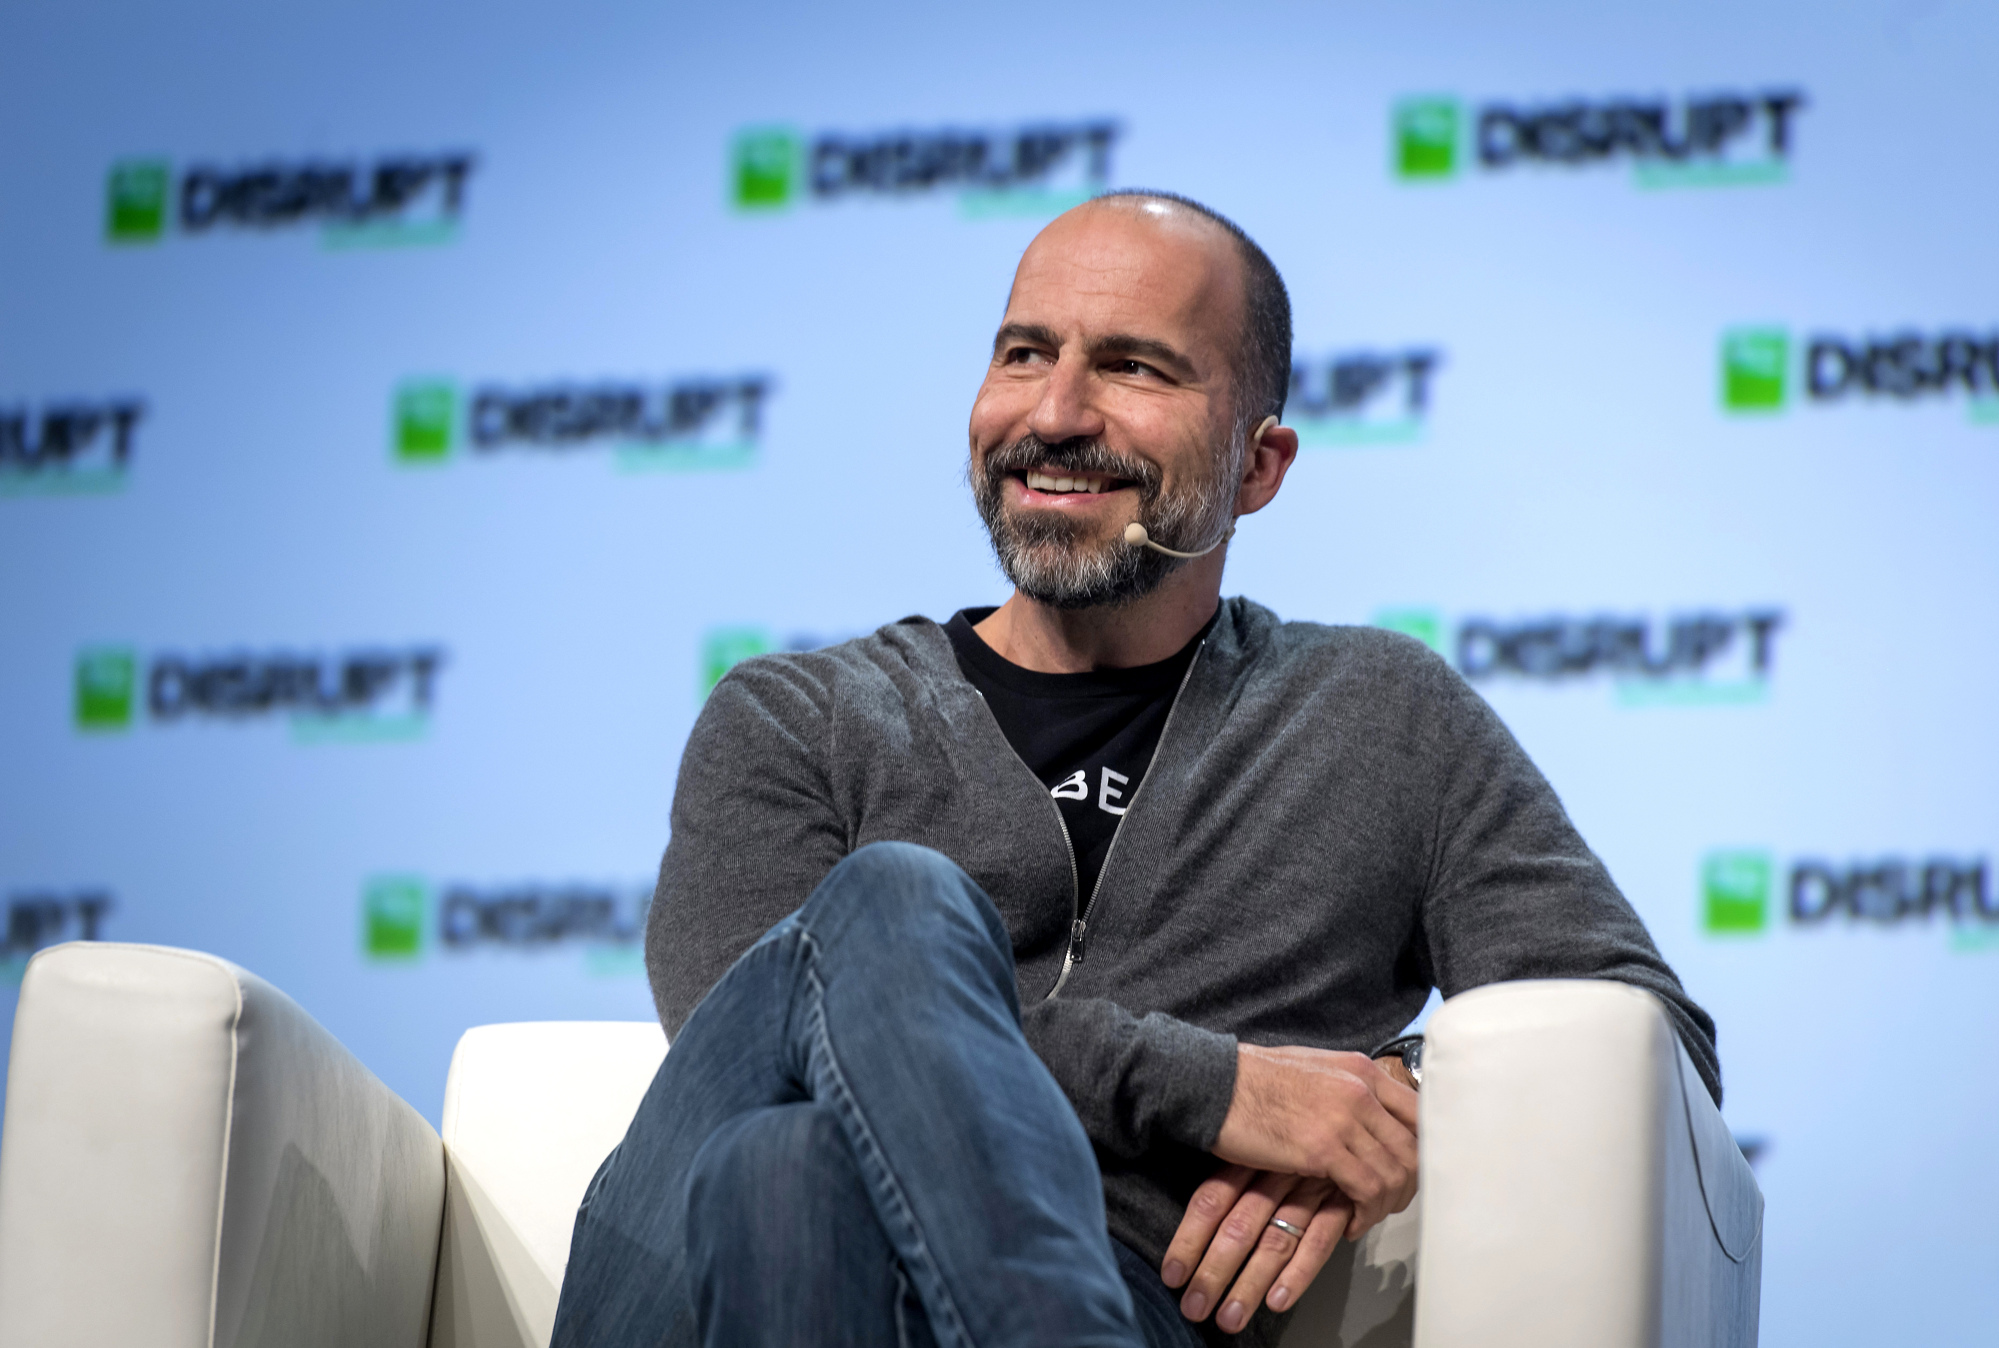 Uber On Track For 2019 IPO - Warrior Trading News